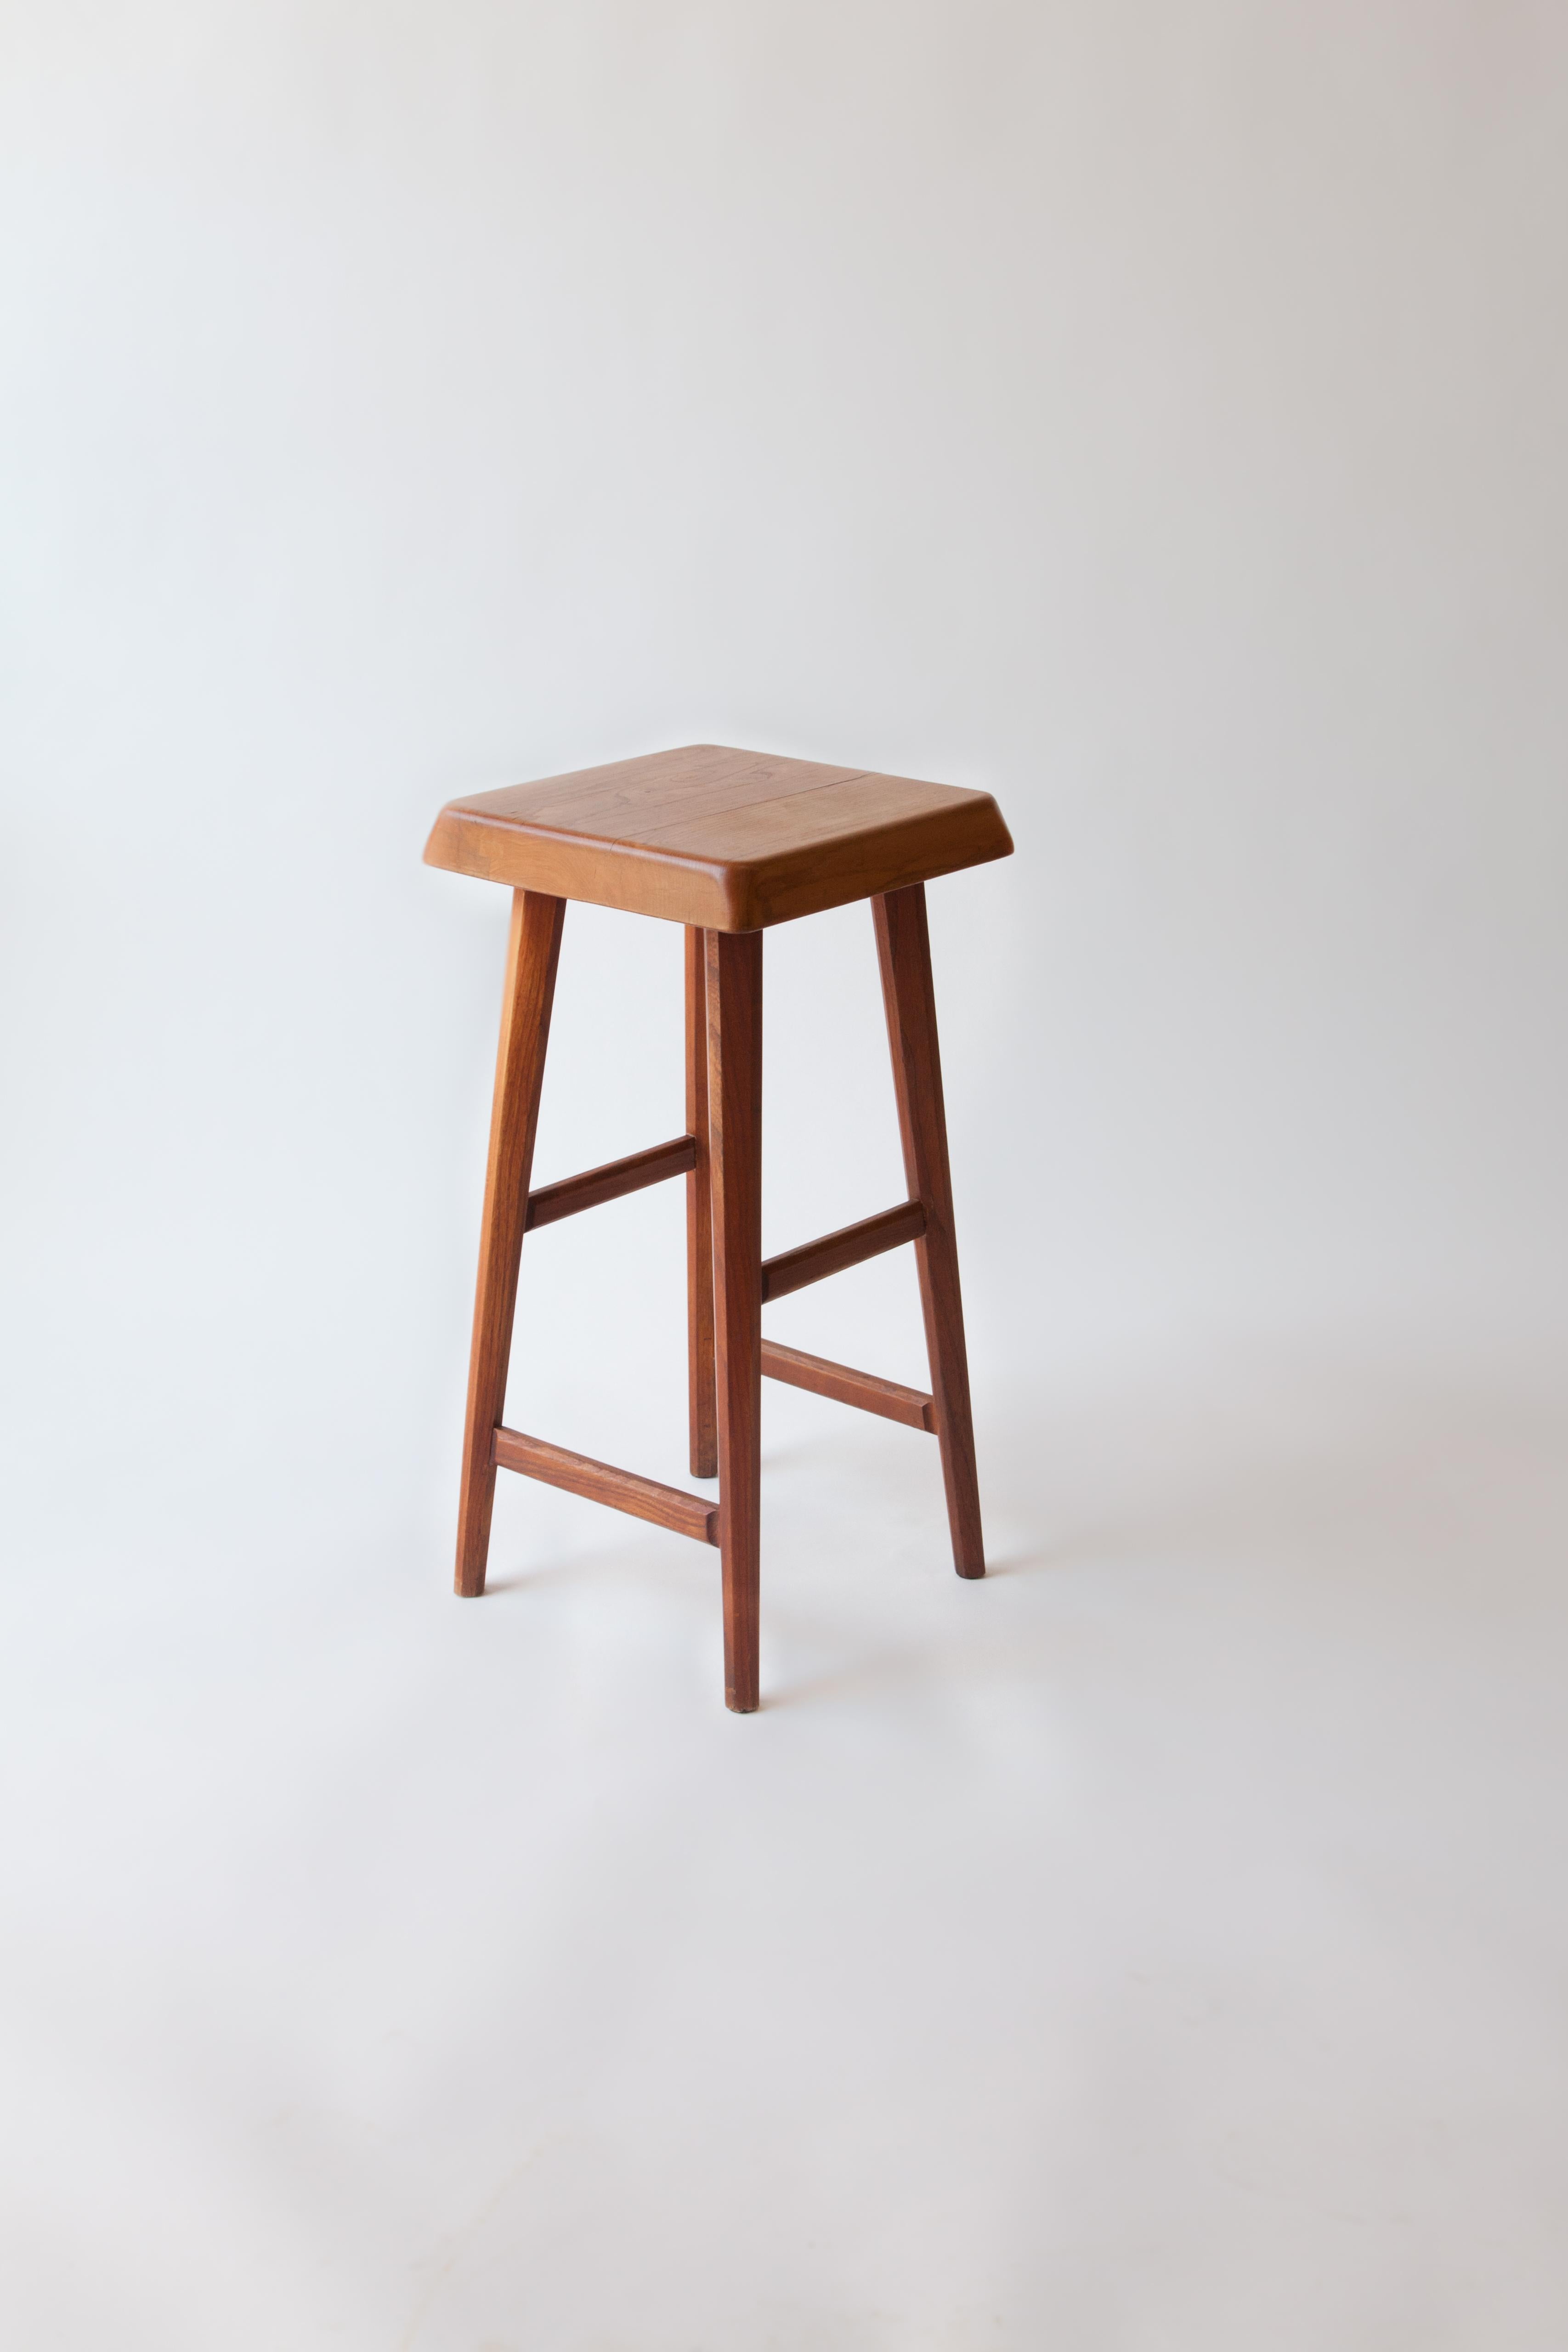 Stool by Pierre Chapo in solid elm, France, 1960s. 

Model #S-01-C

Can also double as a side table.